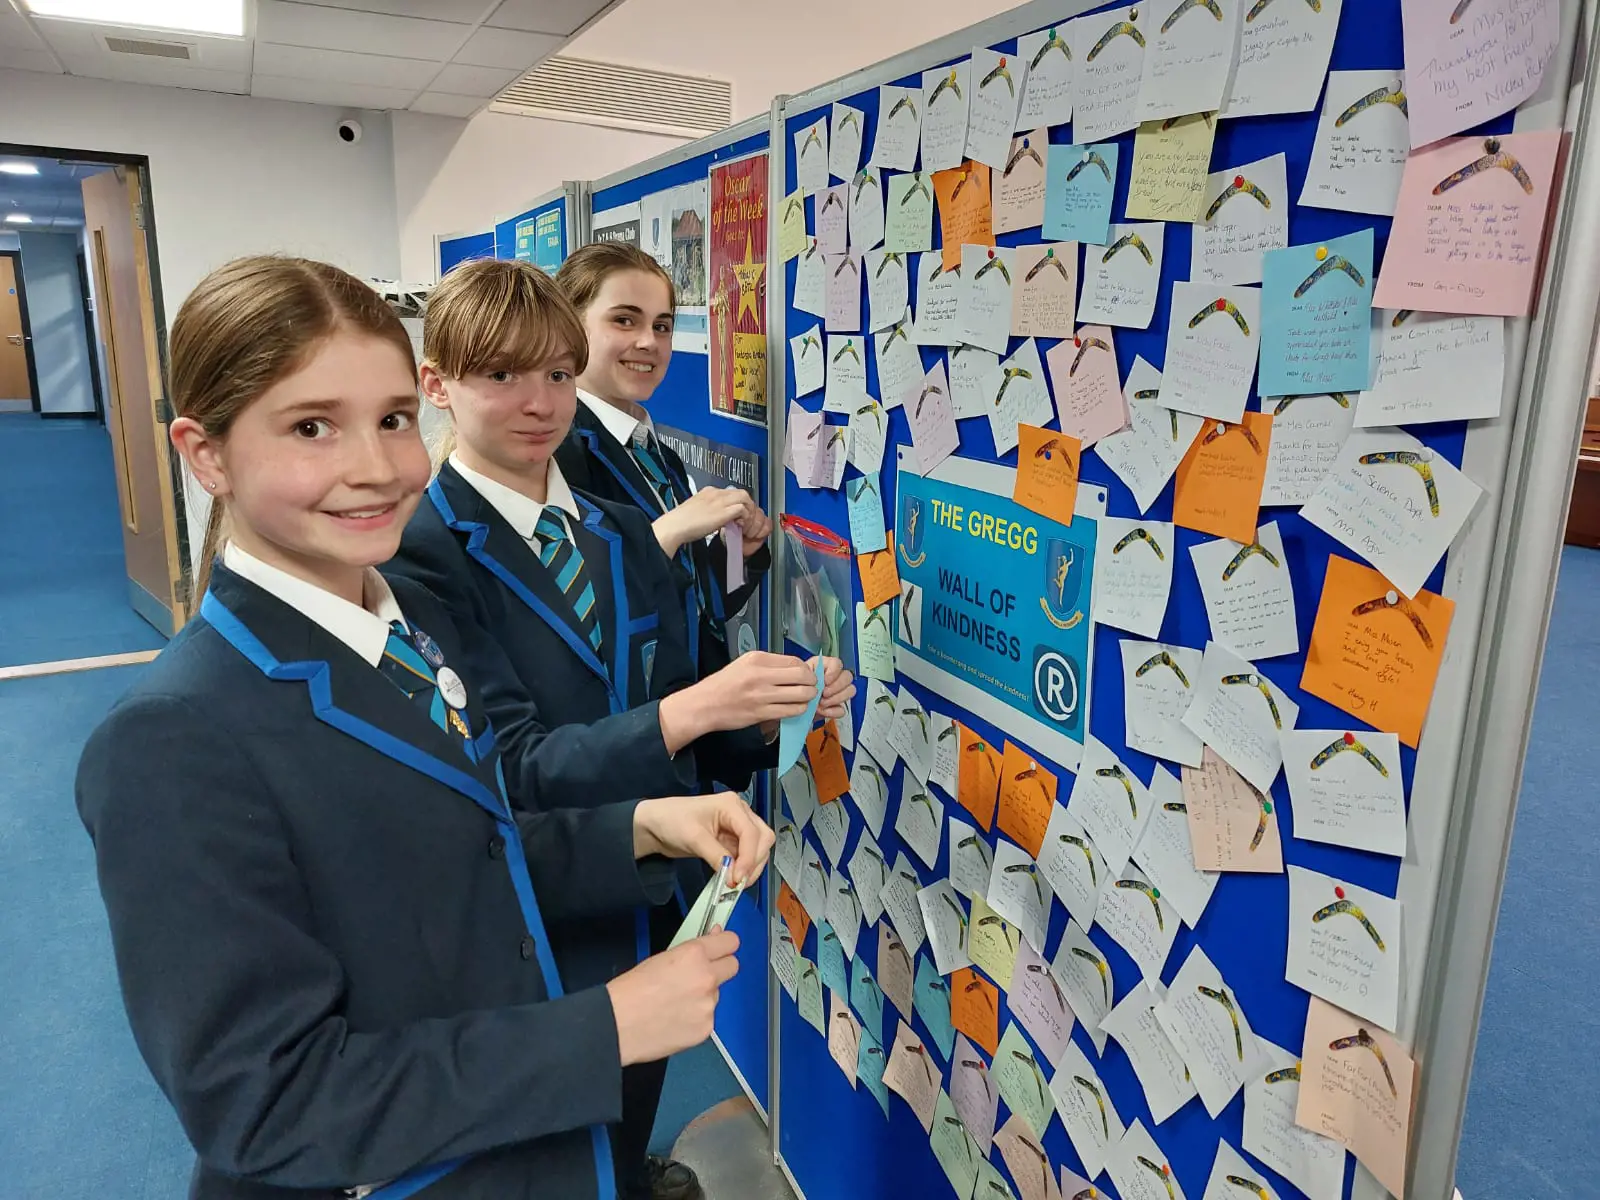 Senior School Students at The Gregg School, woking on The Wall Of Kindness display